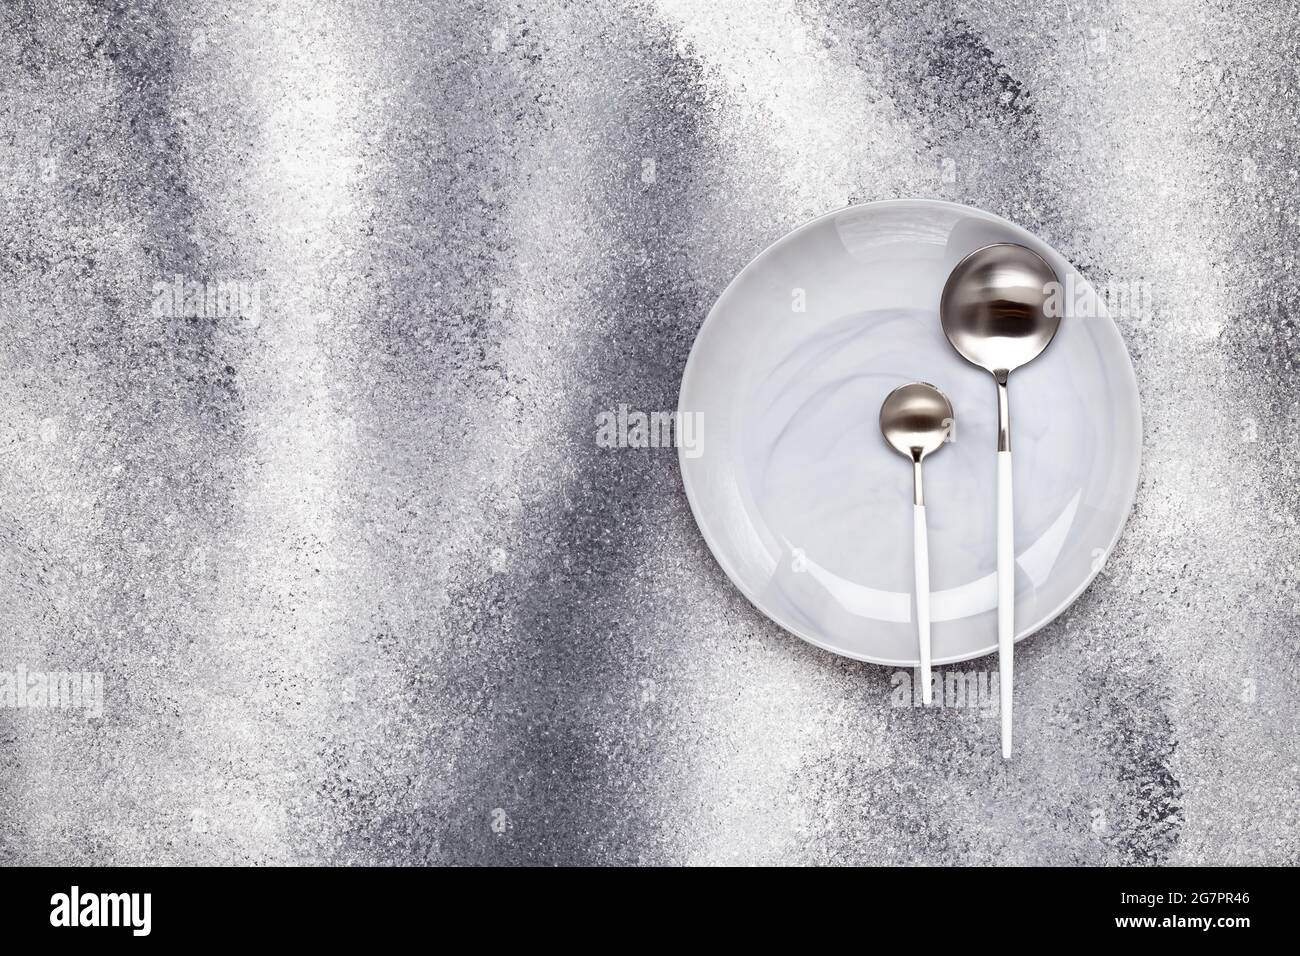 Empty clean ceramics plate and unused teaspoon with tablespoon. Crockery and cutlery on a gray grunge table, serving concept. Monochrome design menu. Stock Photo